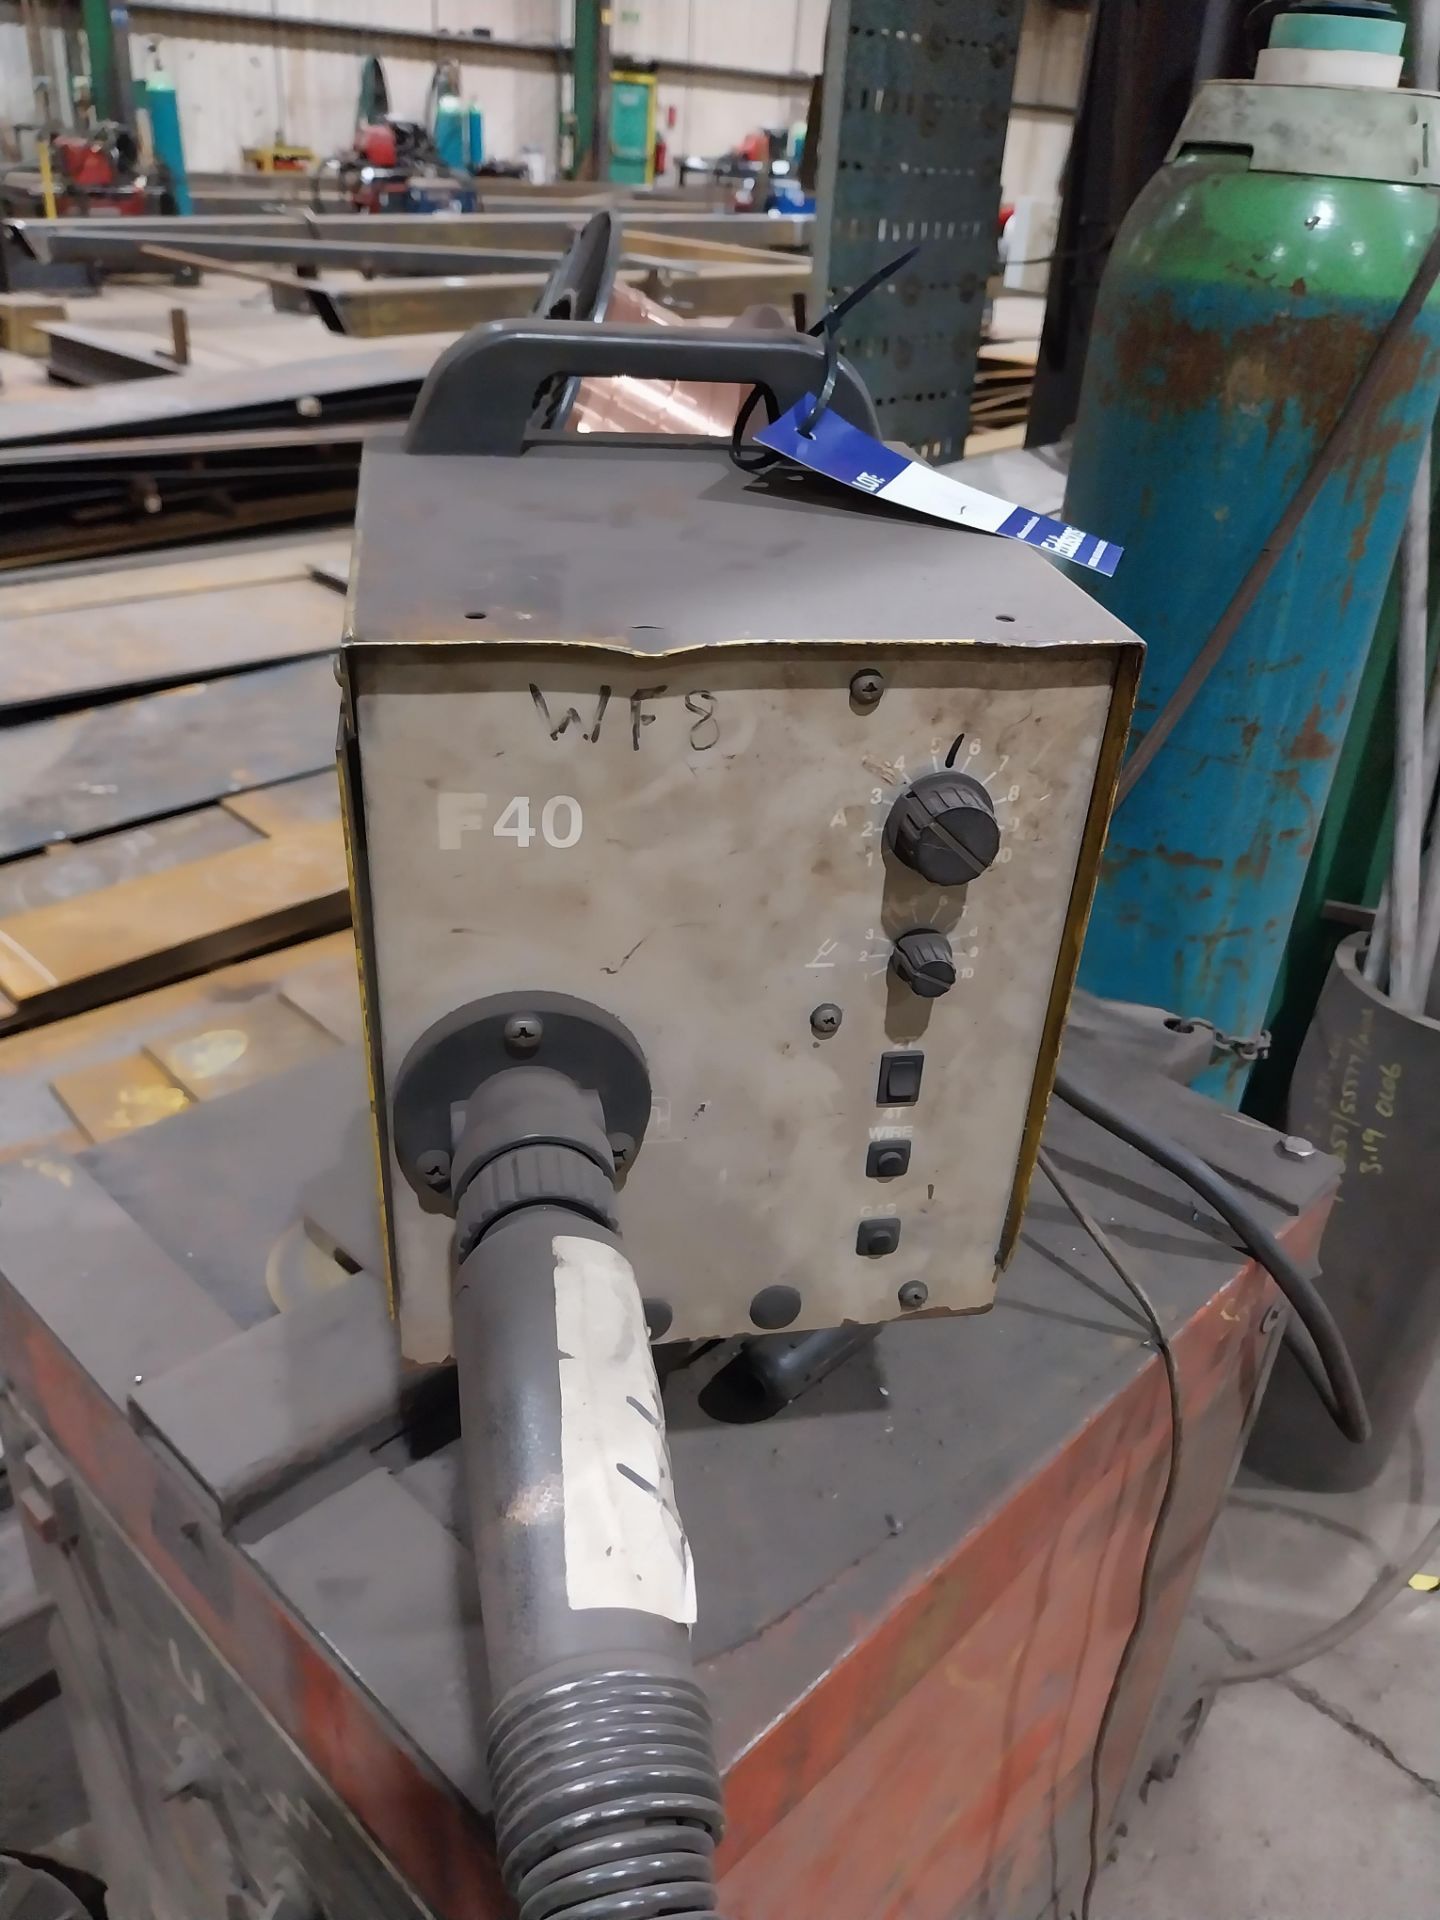 Kempp RA450 mig welder with F40 wire feed, torch and clamp (bottle not included) - Image 4 of 7